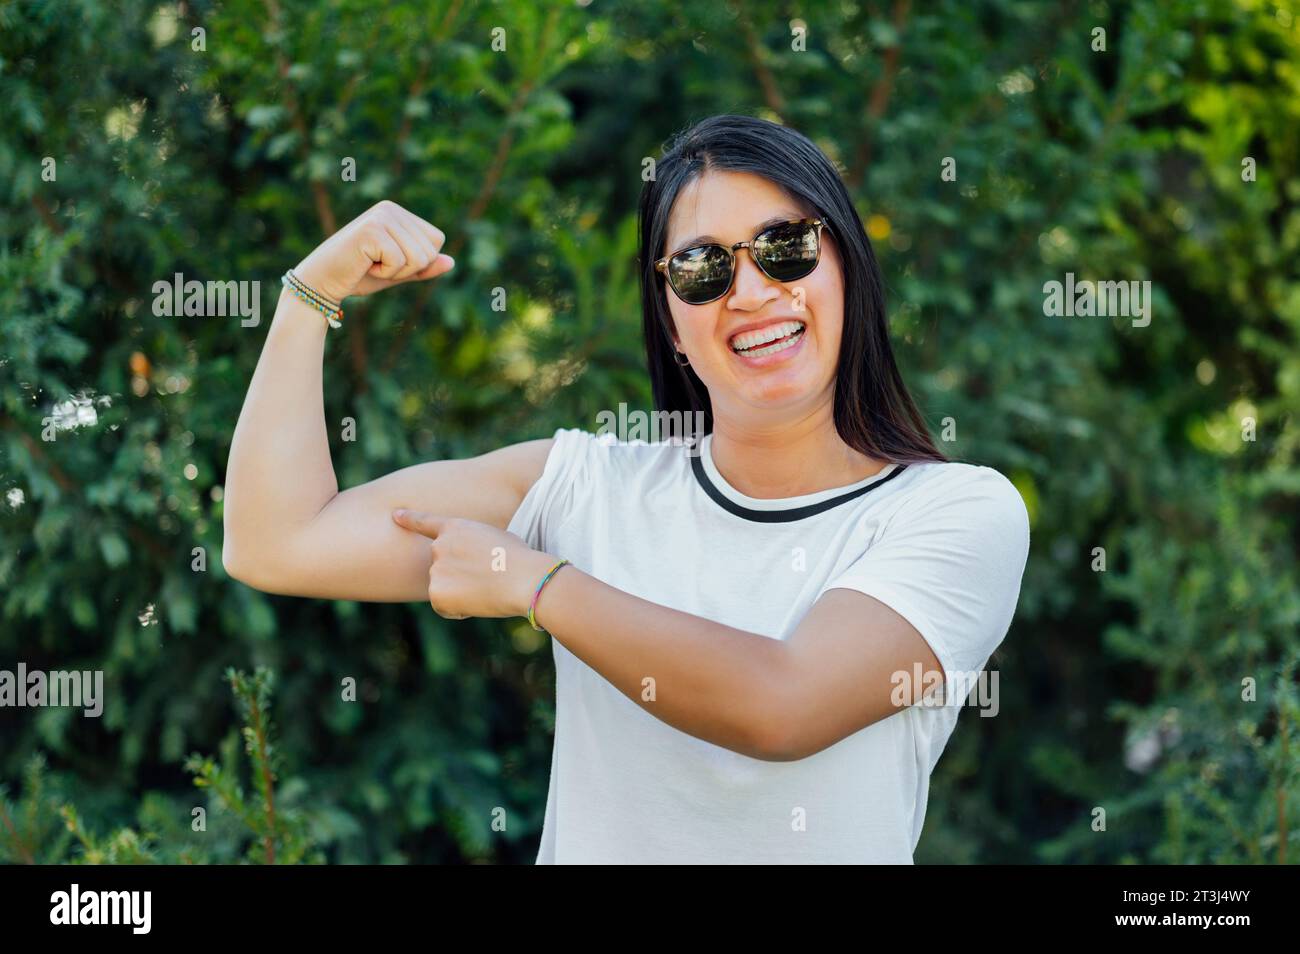 Young woman pointing to her arm .Power woman Stock Photo